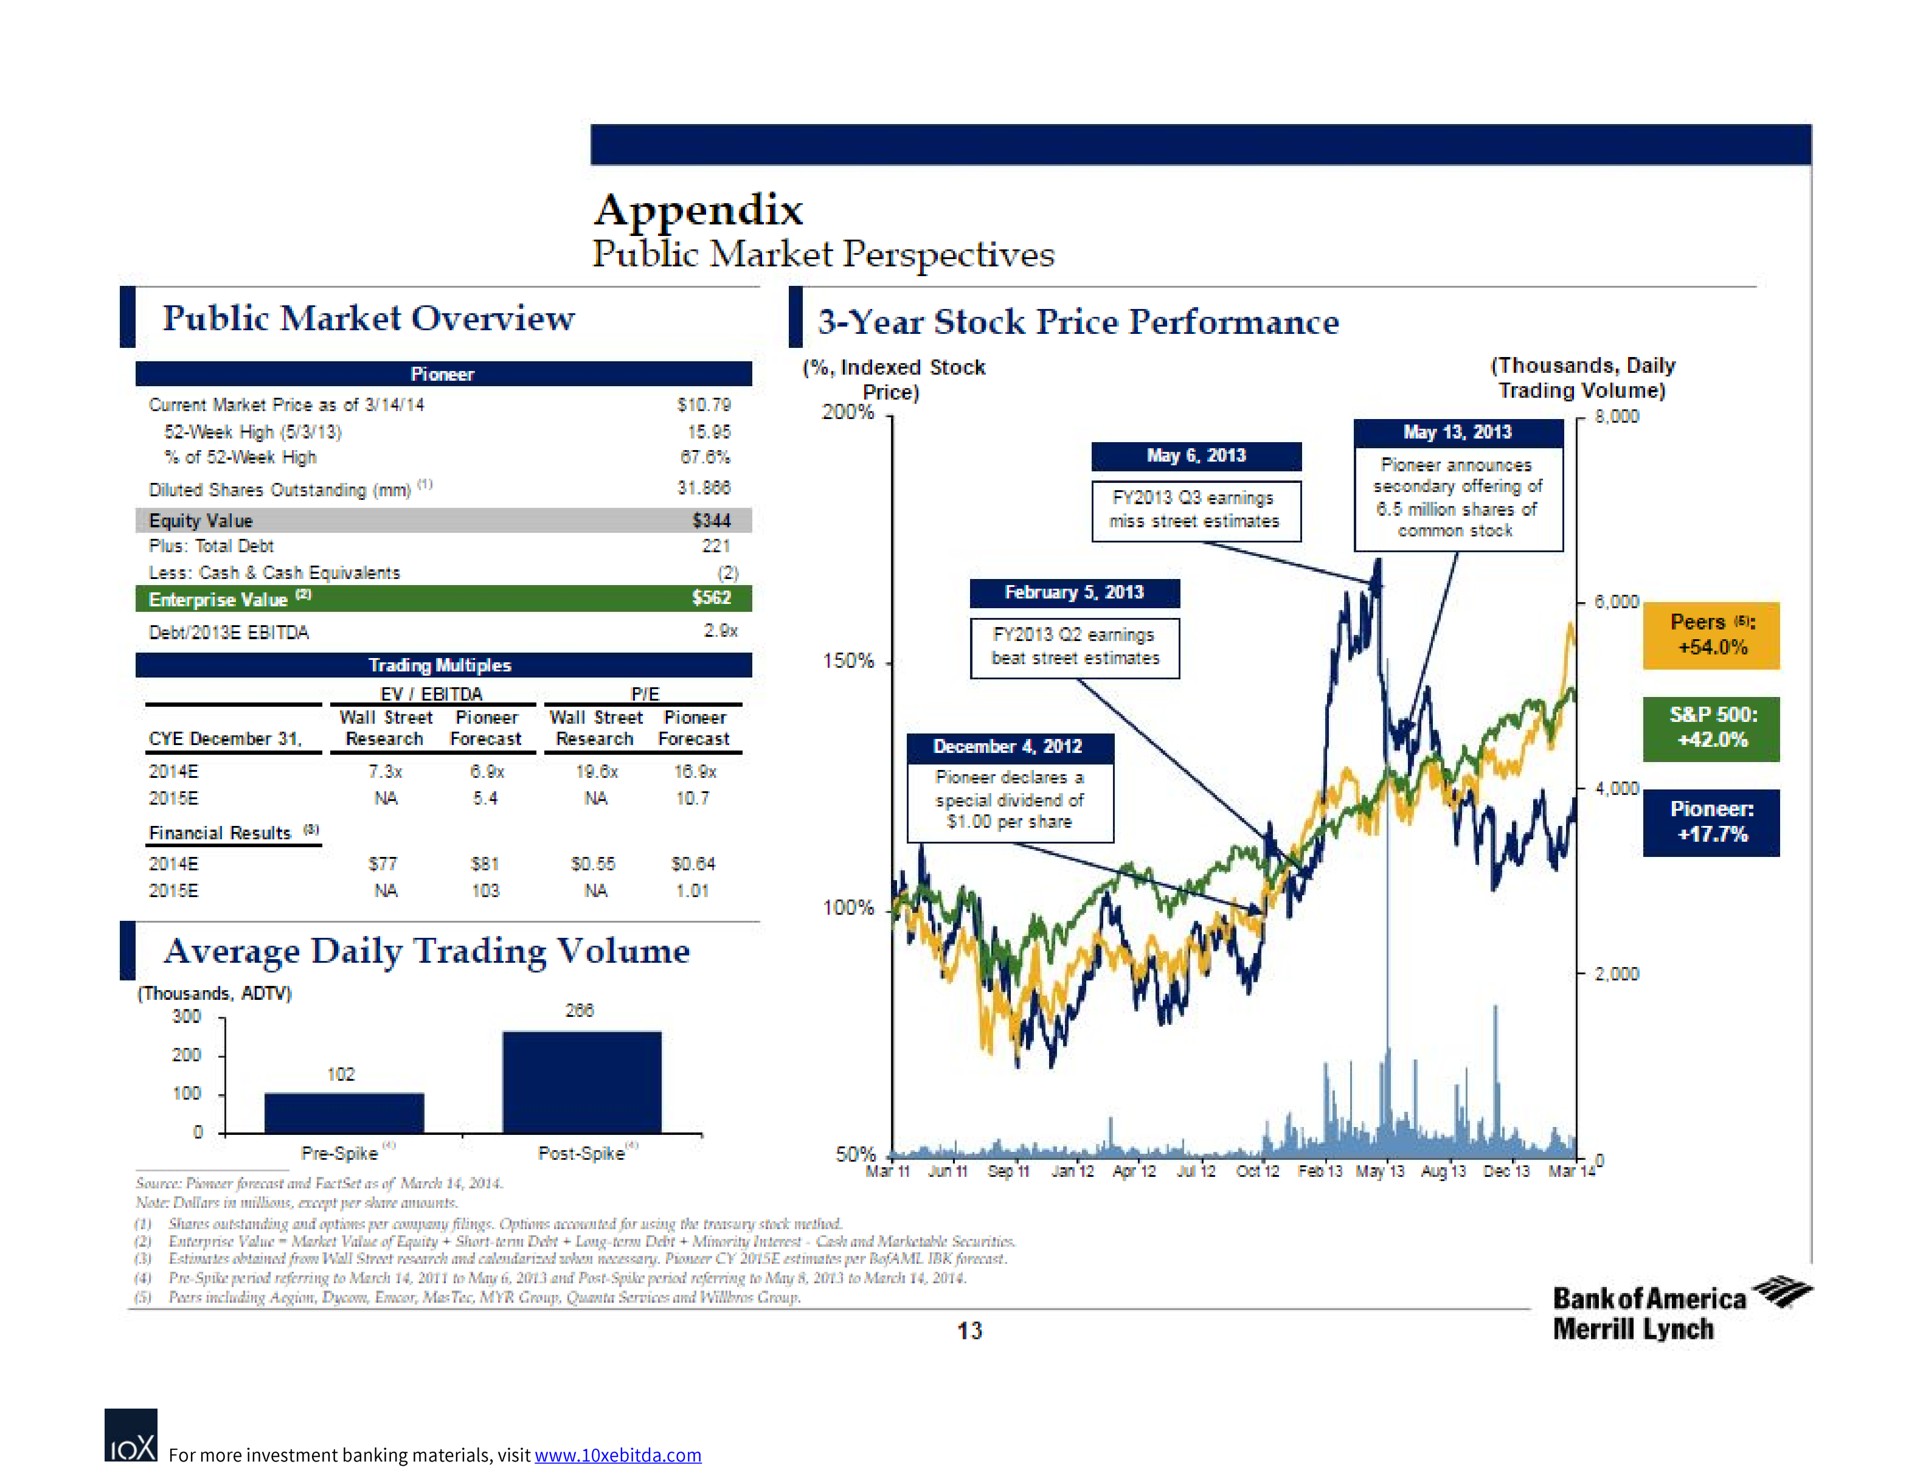 appendix public market perspectives public market overview i year stock price performance a sens average daily trading volume | Bank of America